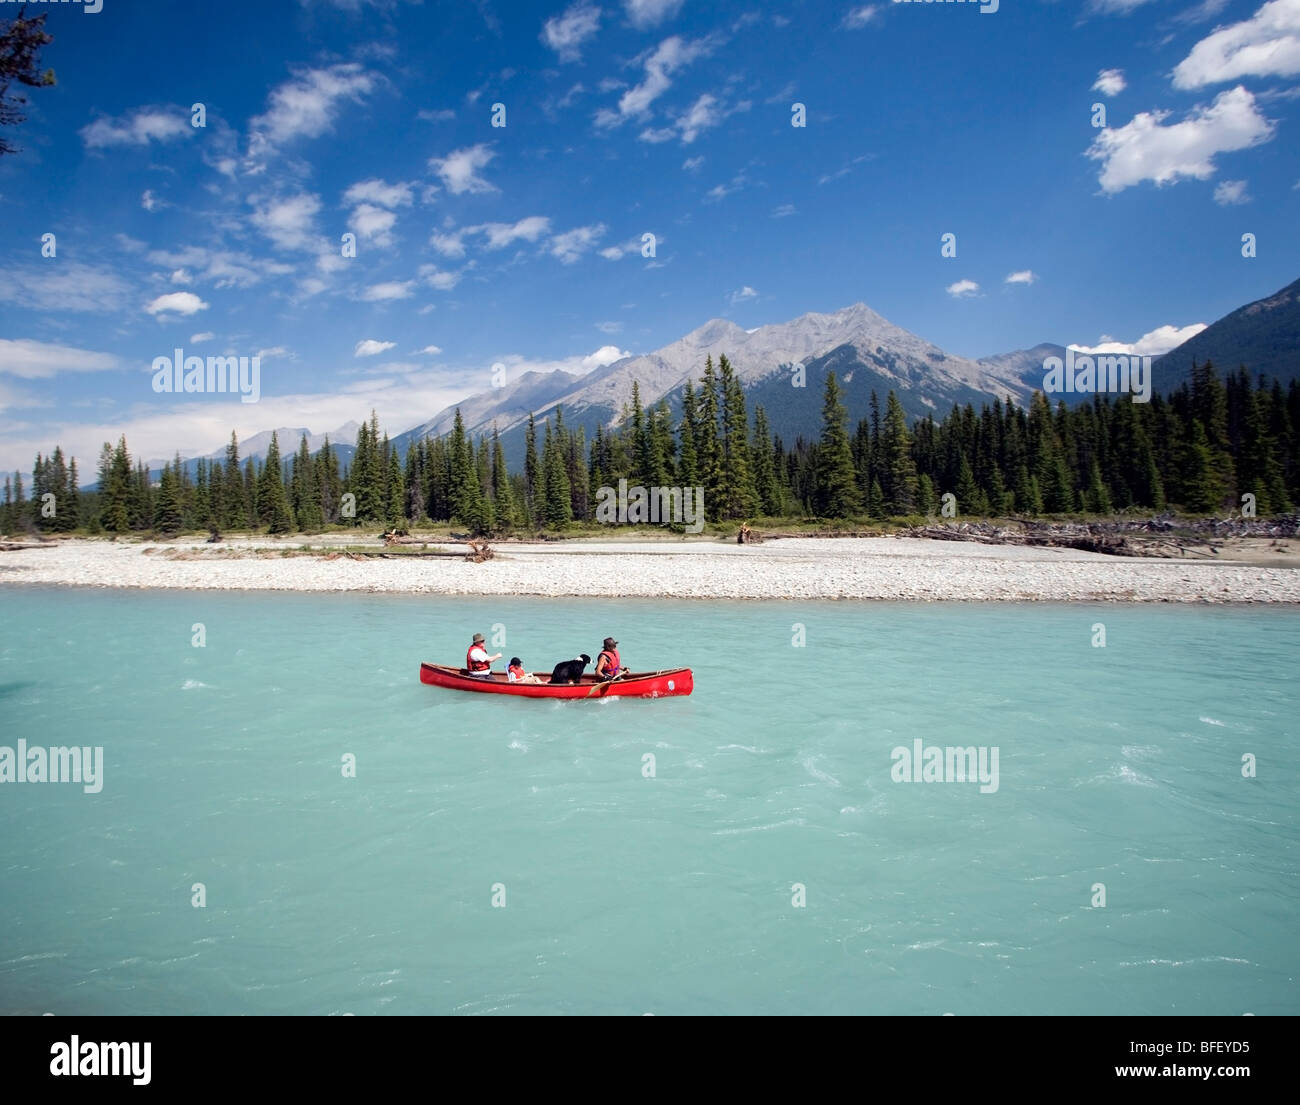 Canoeing the Kootney River, Kootney National Park, British Columbia, Canada, people, mountains, children, dog Stock Photo